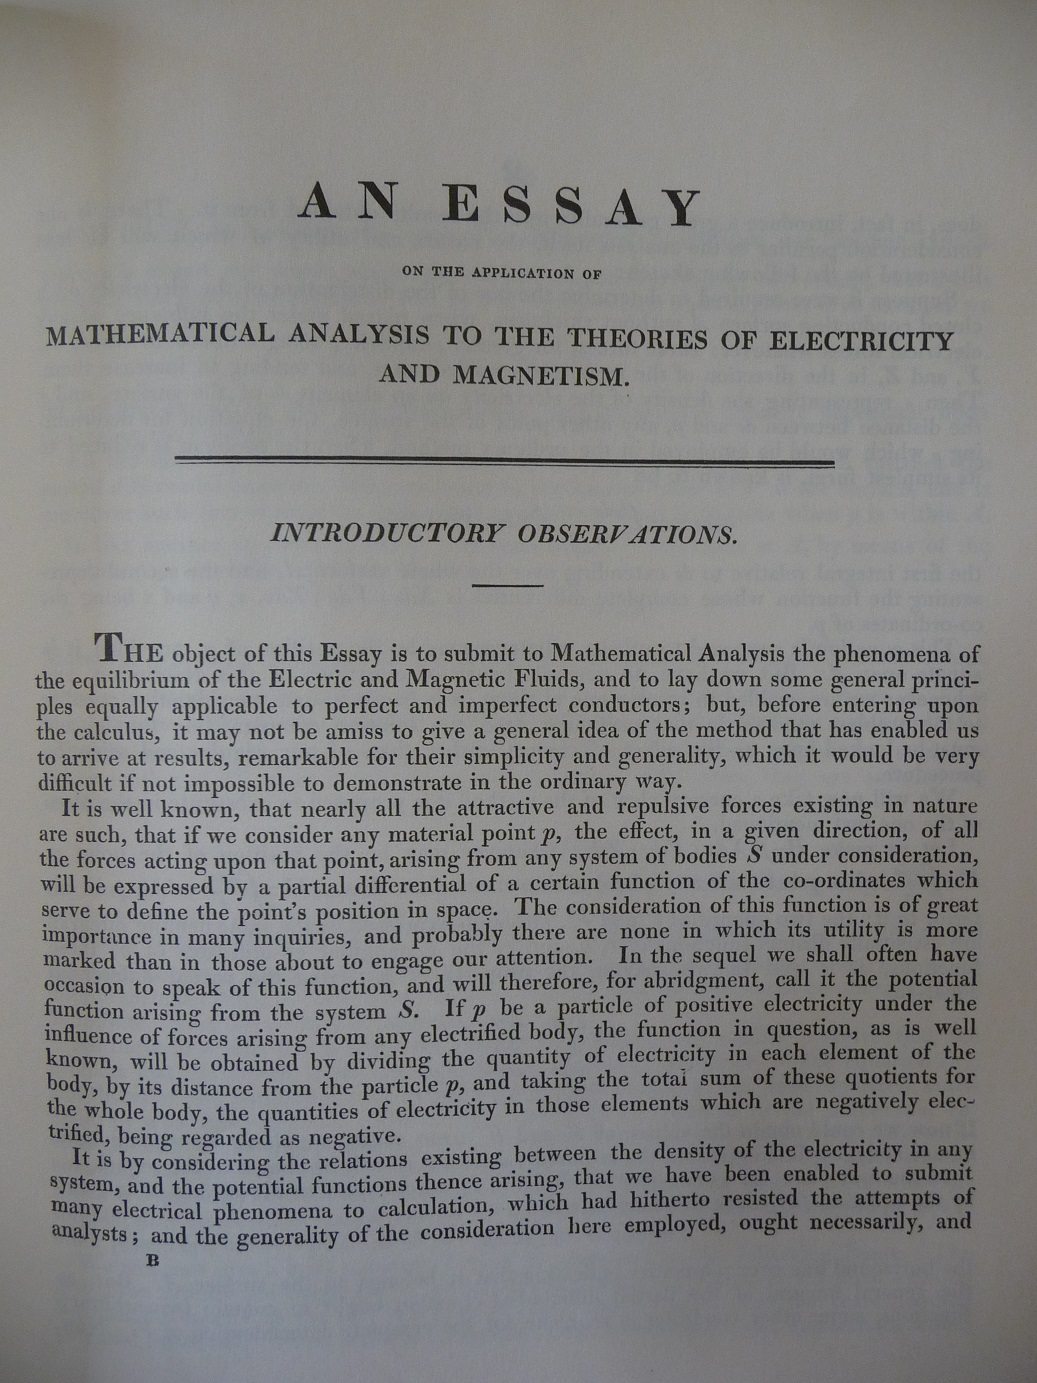 The introduction to the published essay. 